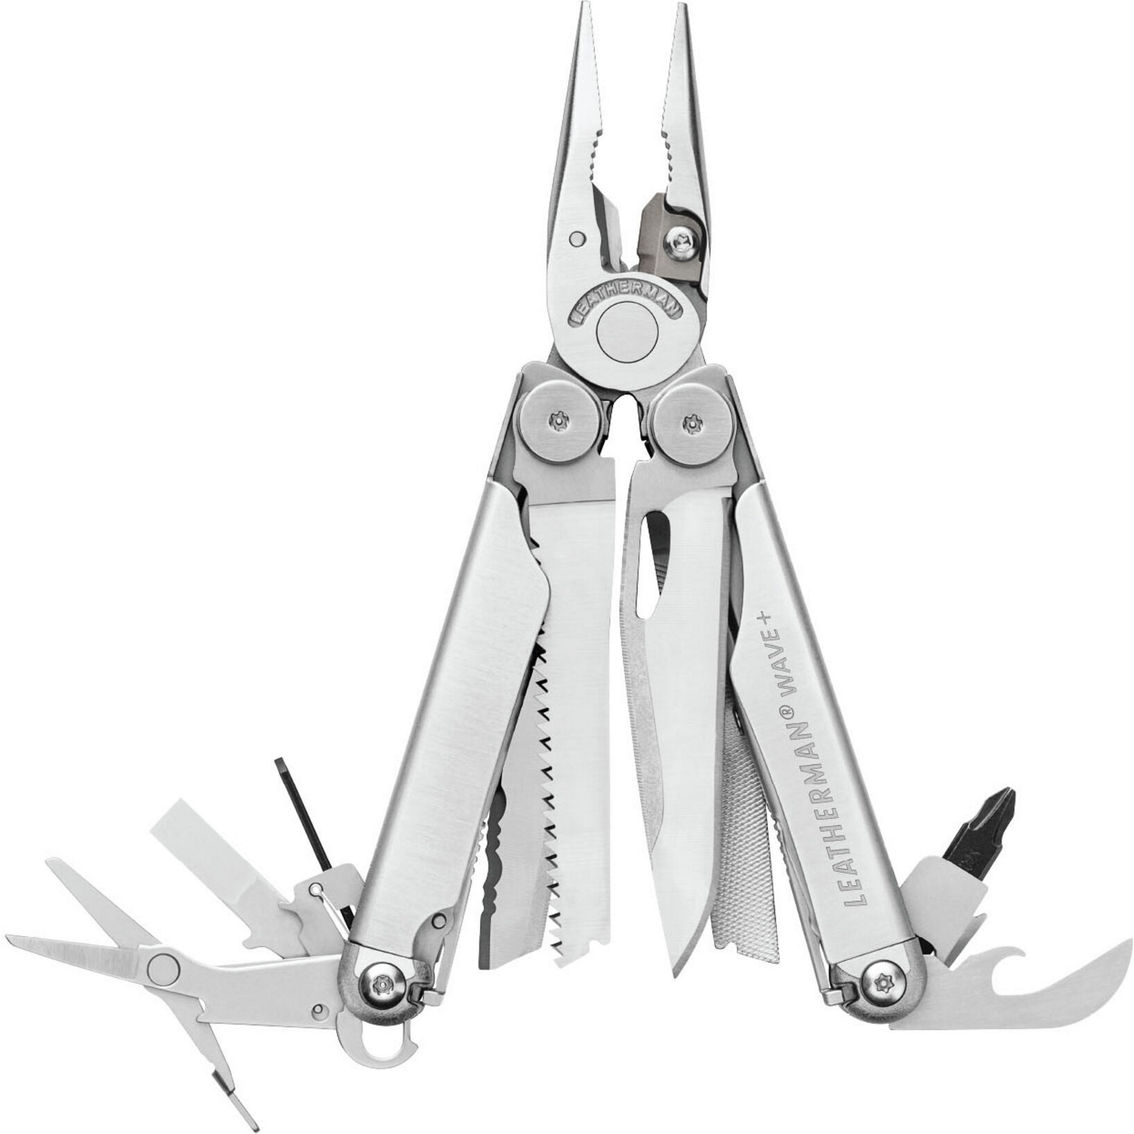 Leatherman multitool  as low as 43.20 for Military: Charge $104  Wave Plus $84  Rebar $54 at AAFES